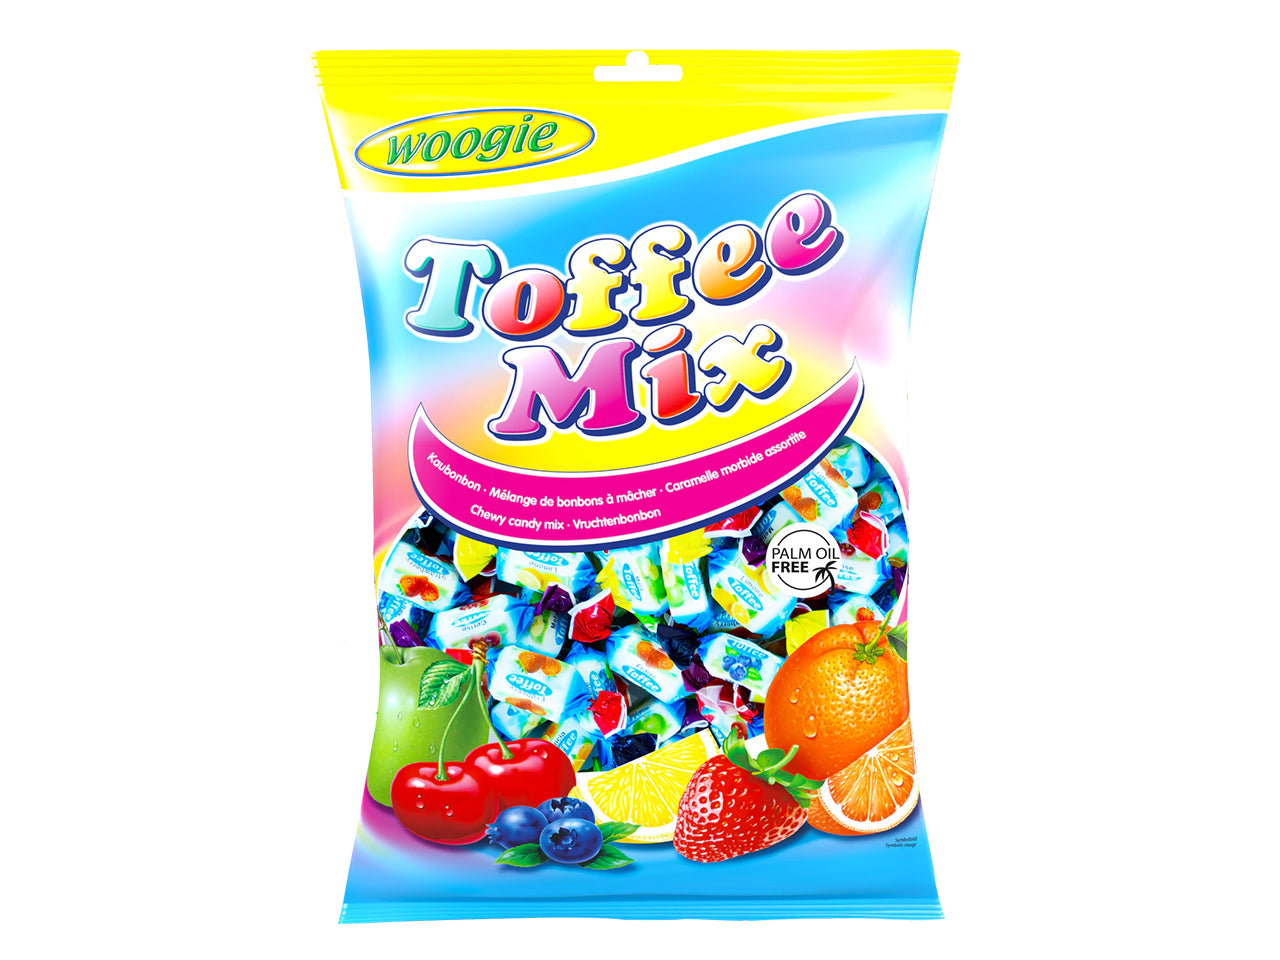 Woogie caramelle toffee mix 1kg